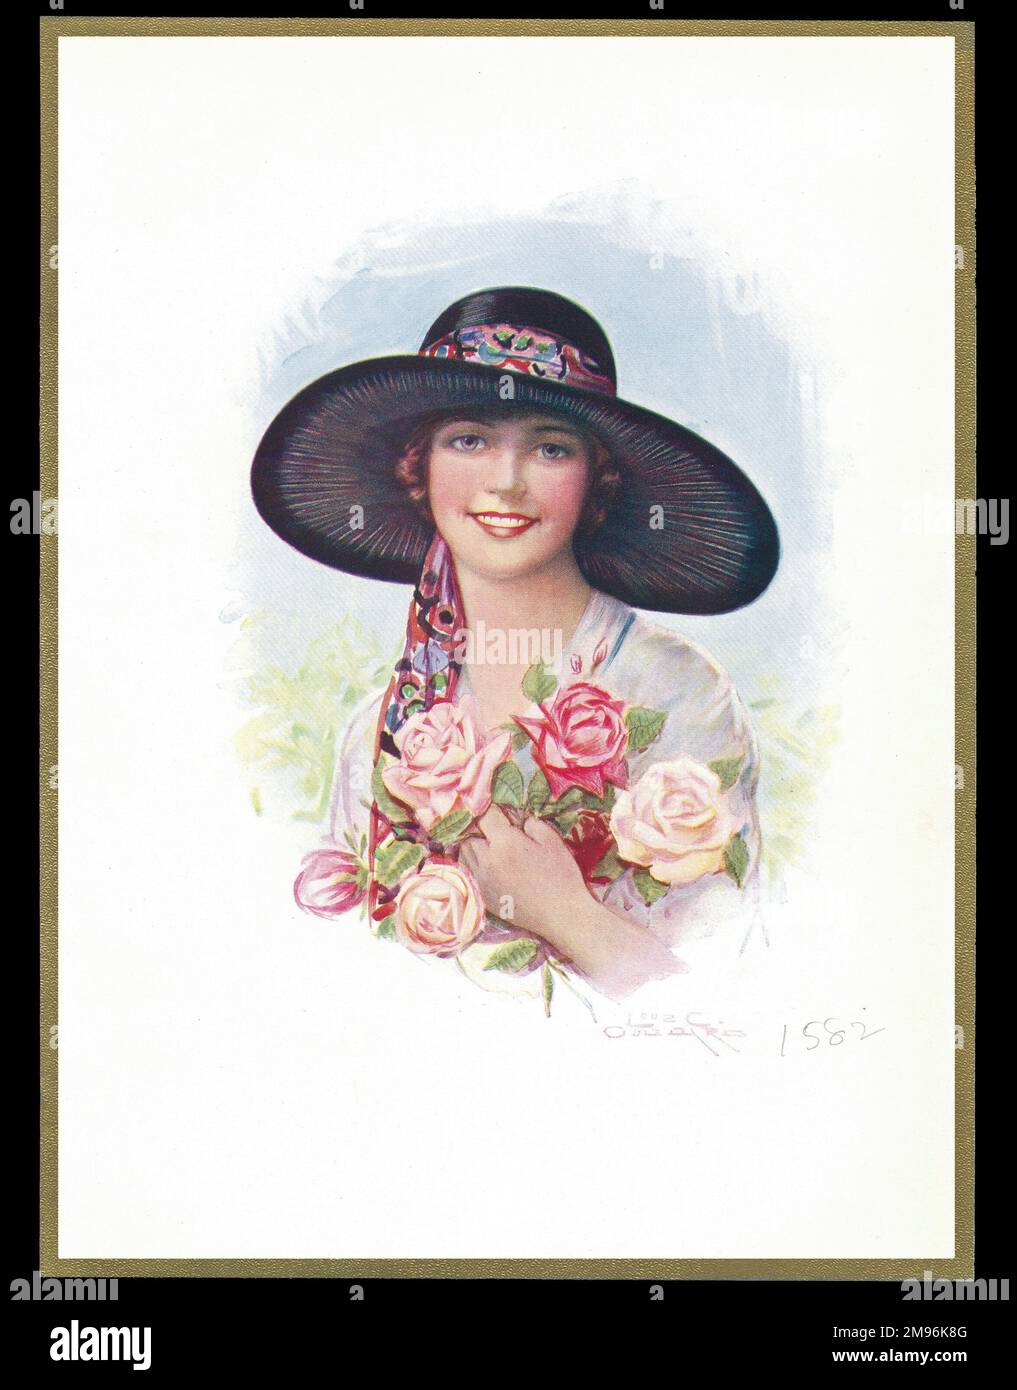 Chocolate box design, featuring a smiling lady in a wide-brimmed hat, holding roses. Stock Photo